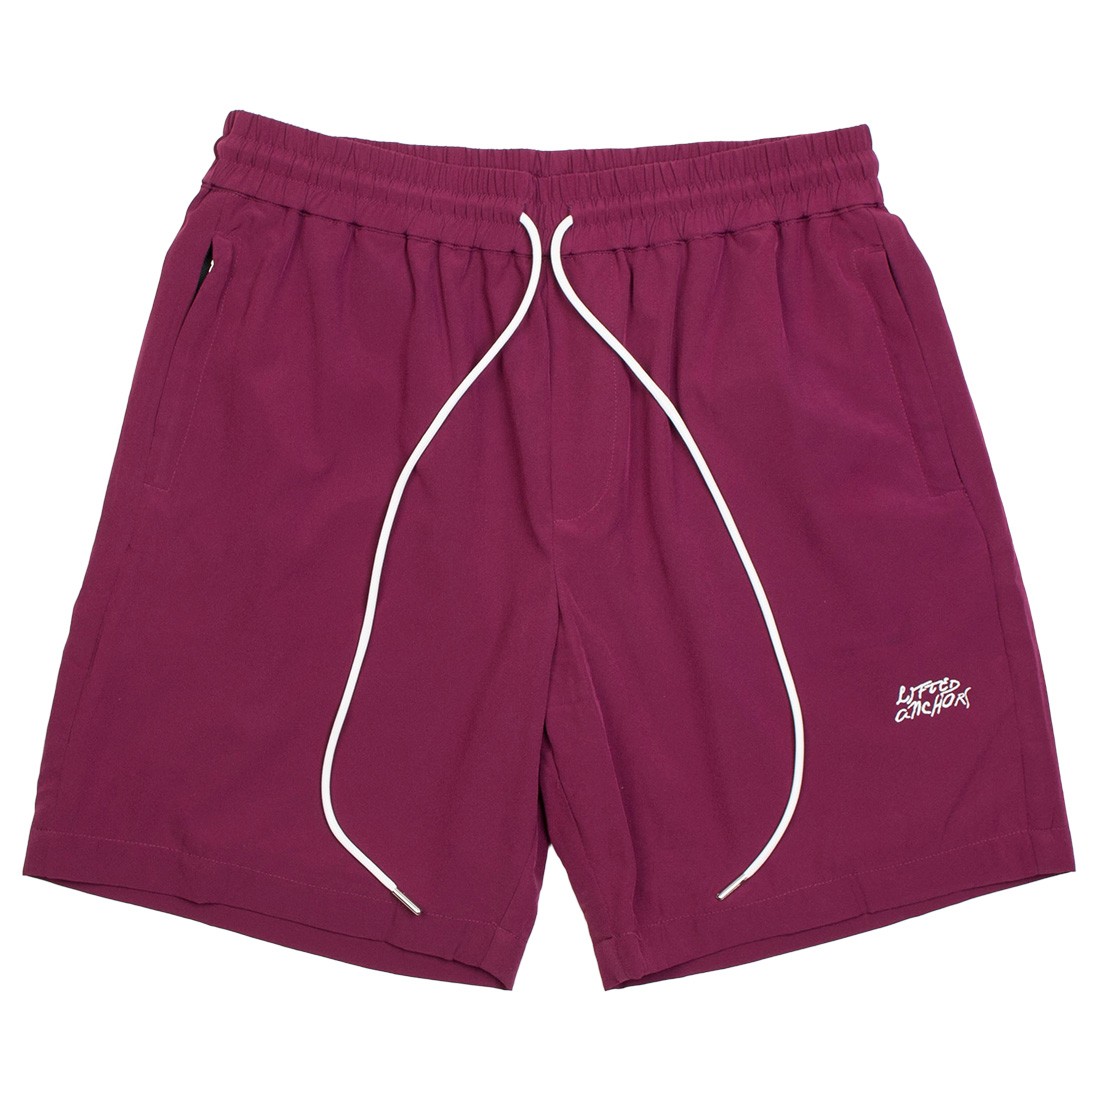 Lifted Anchors Men Server Shorts (red / burgundy)